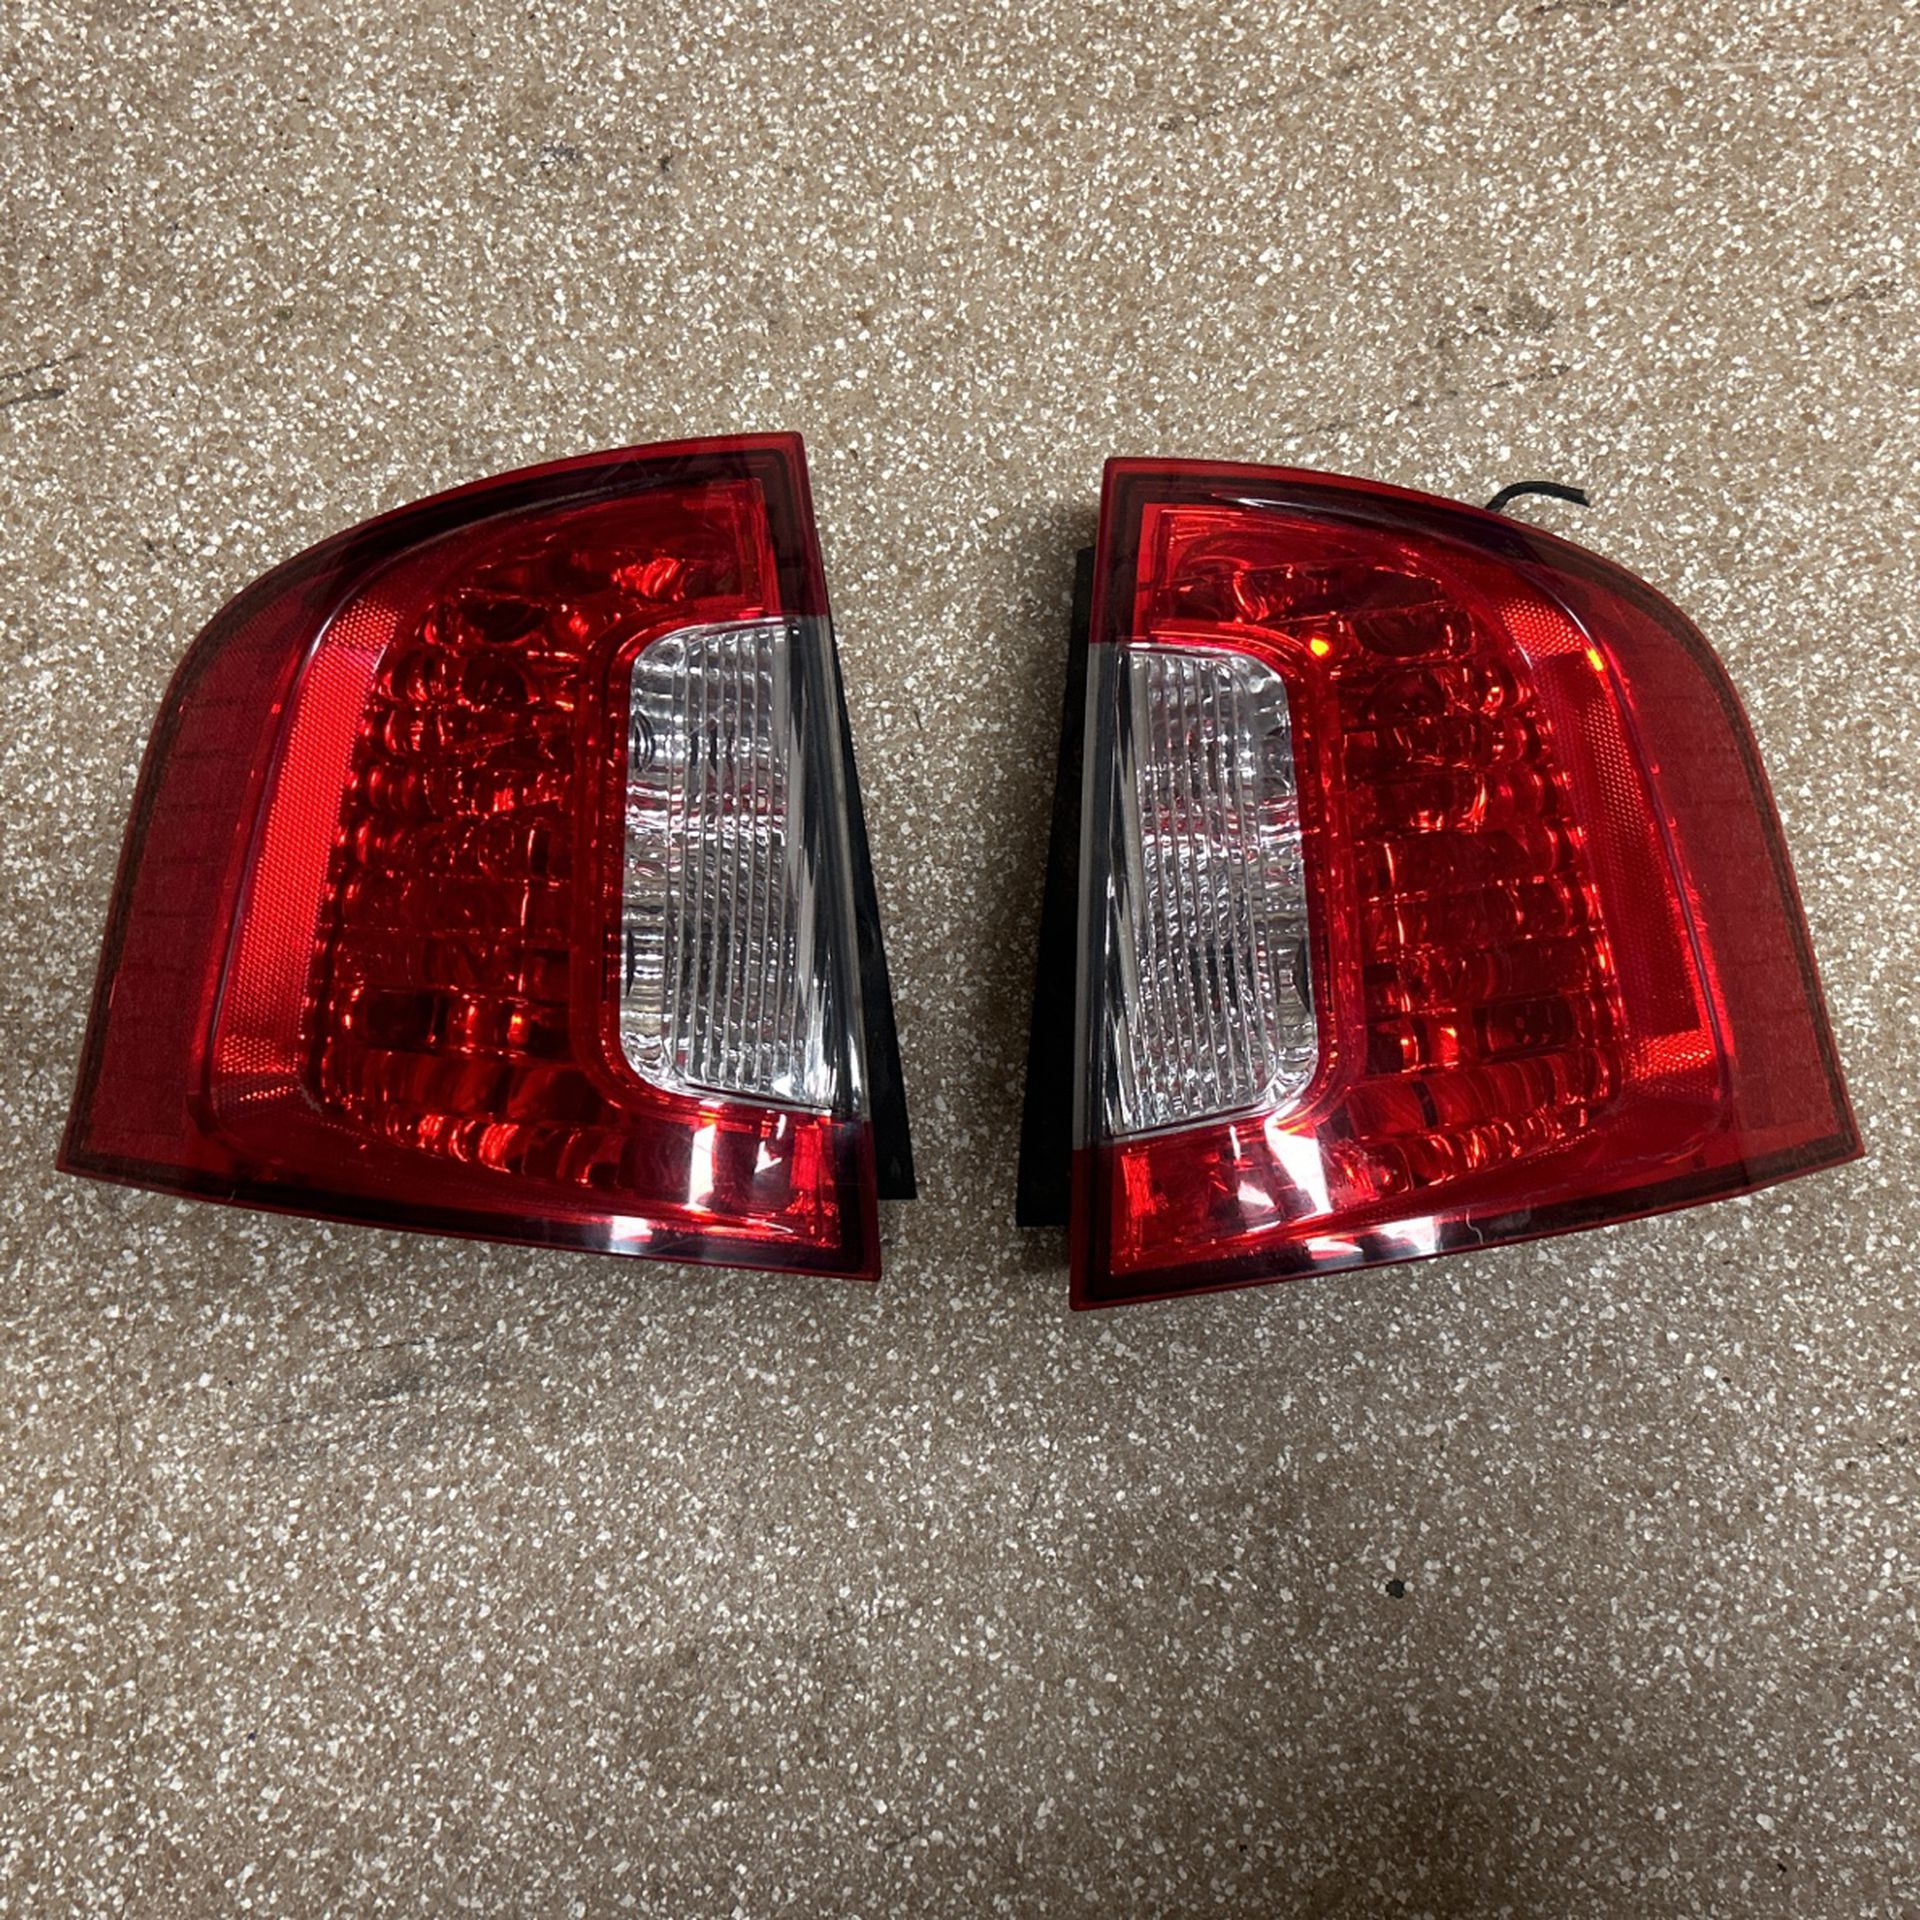 Tail lights 2014 Ford edge, limited edition with lightbulbs